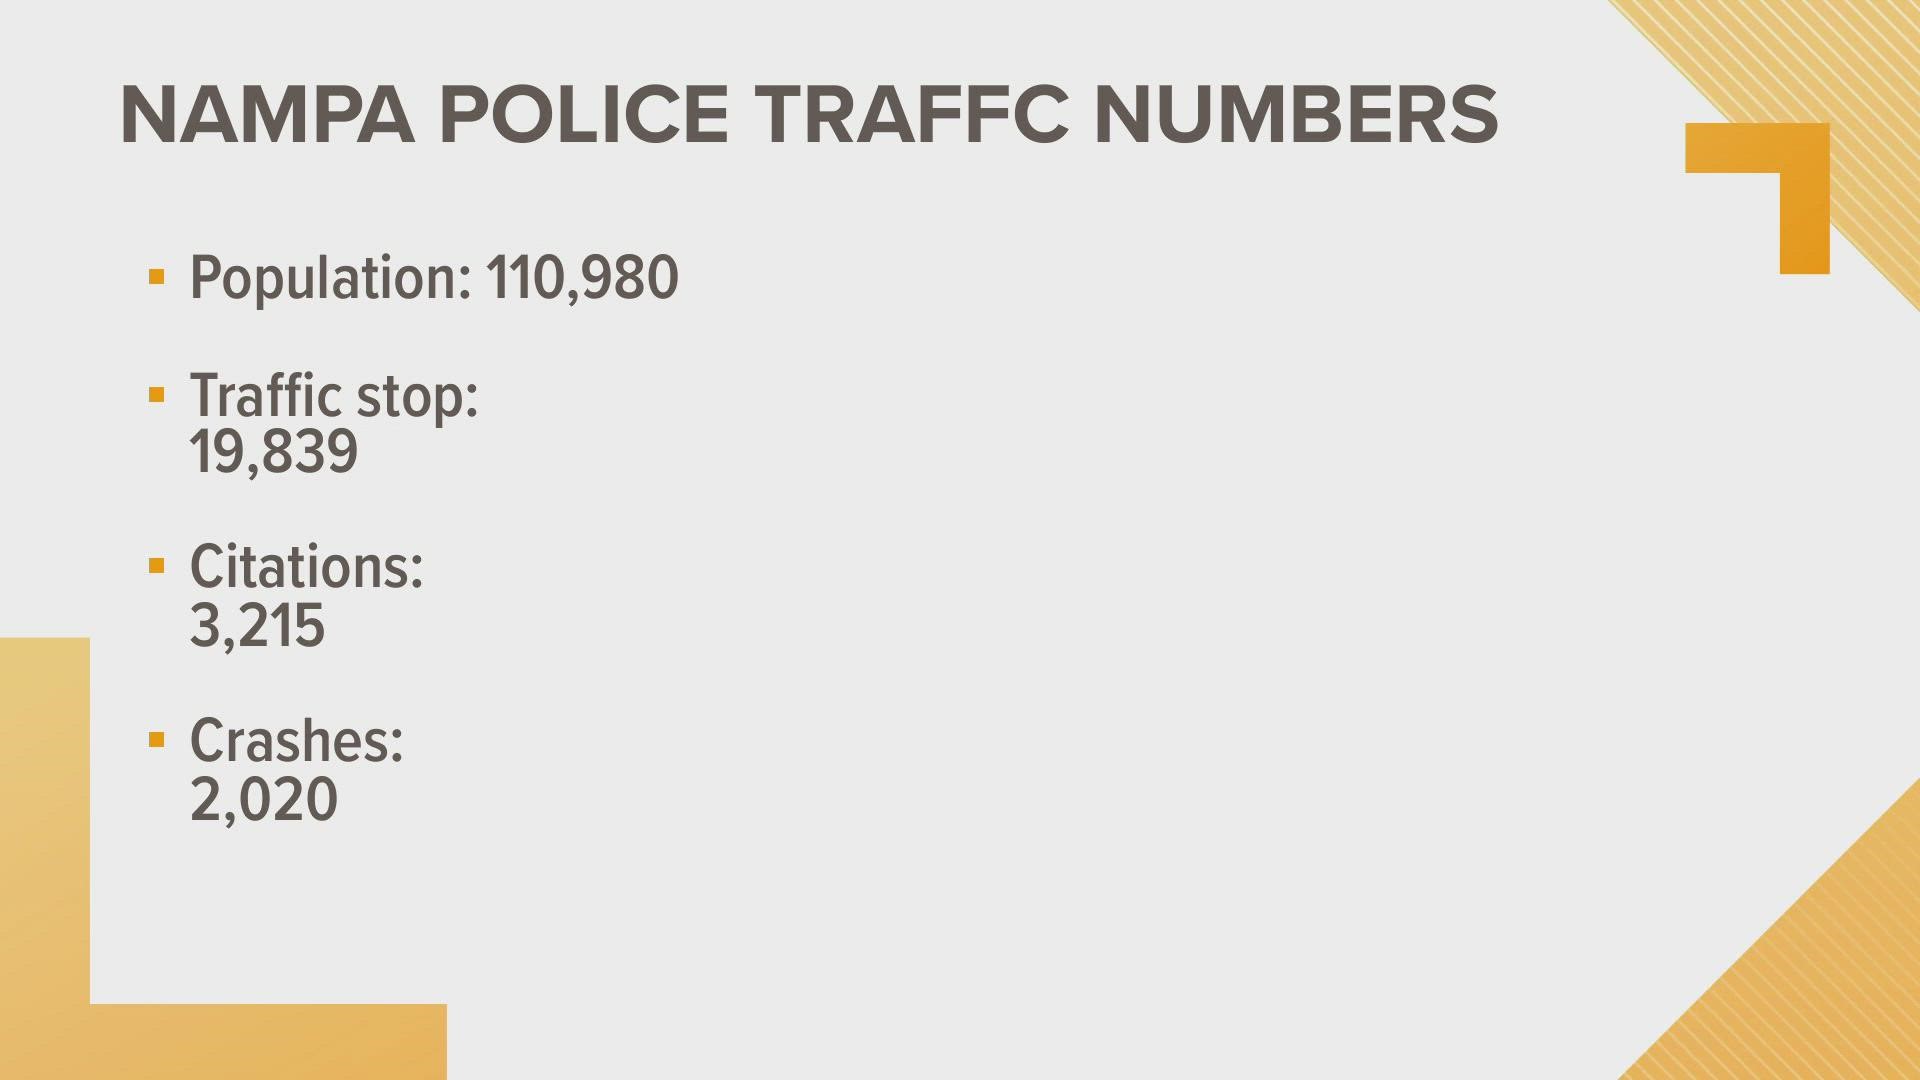 The Nampa Police Department reported there were 19,839 traffic stops and 2,020 total crashes last year.